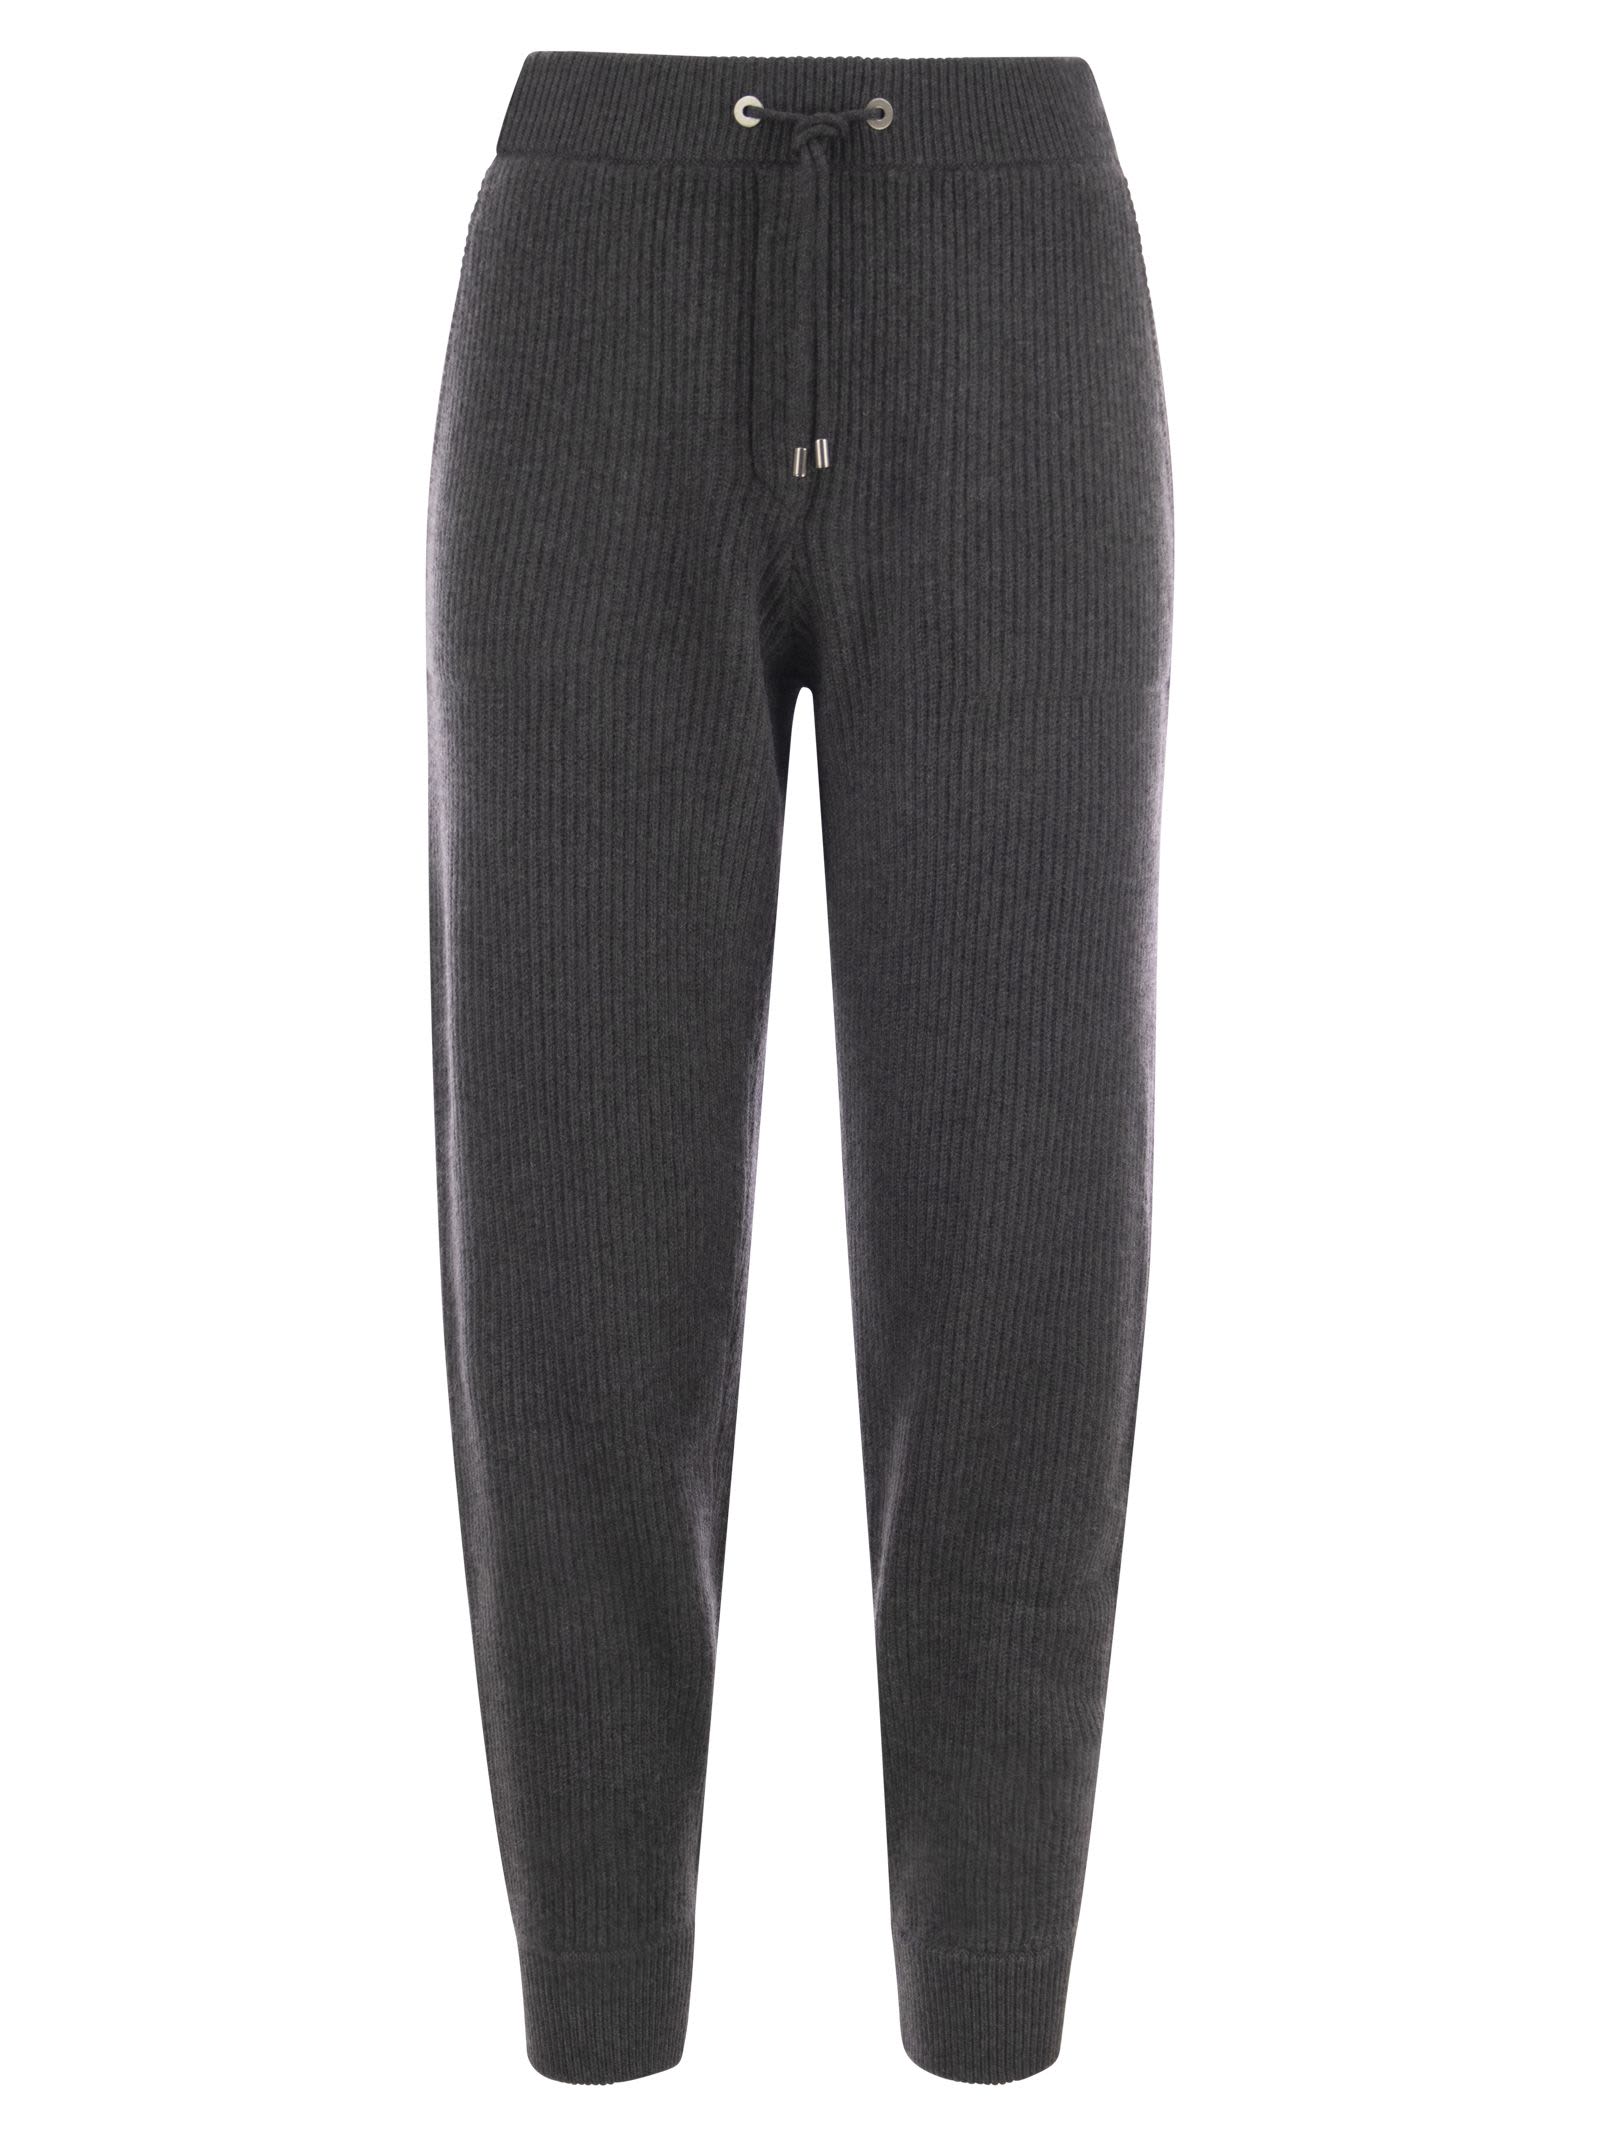 BRUNELLO CUCINELLI COTTON ENGLISH RIB KNITTED TROUSERS WITH SHINY TAB POCKET